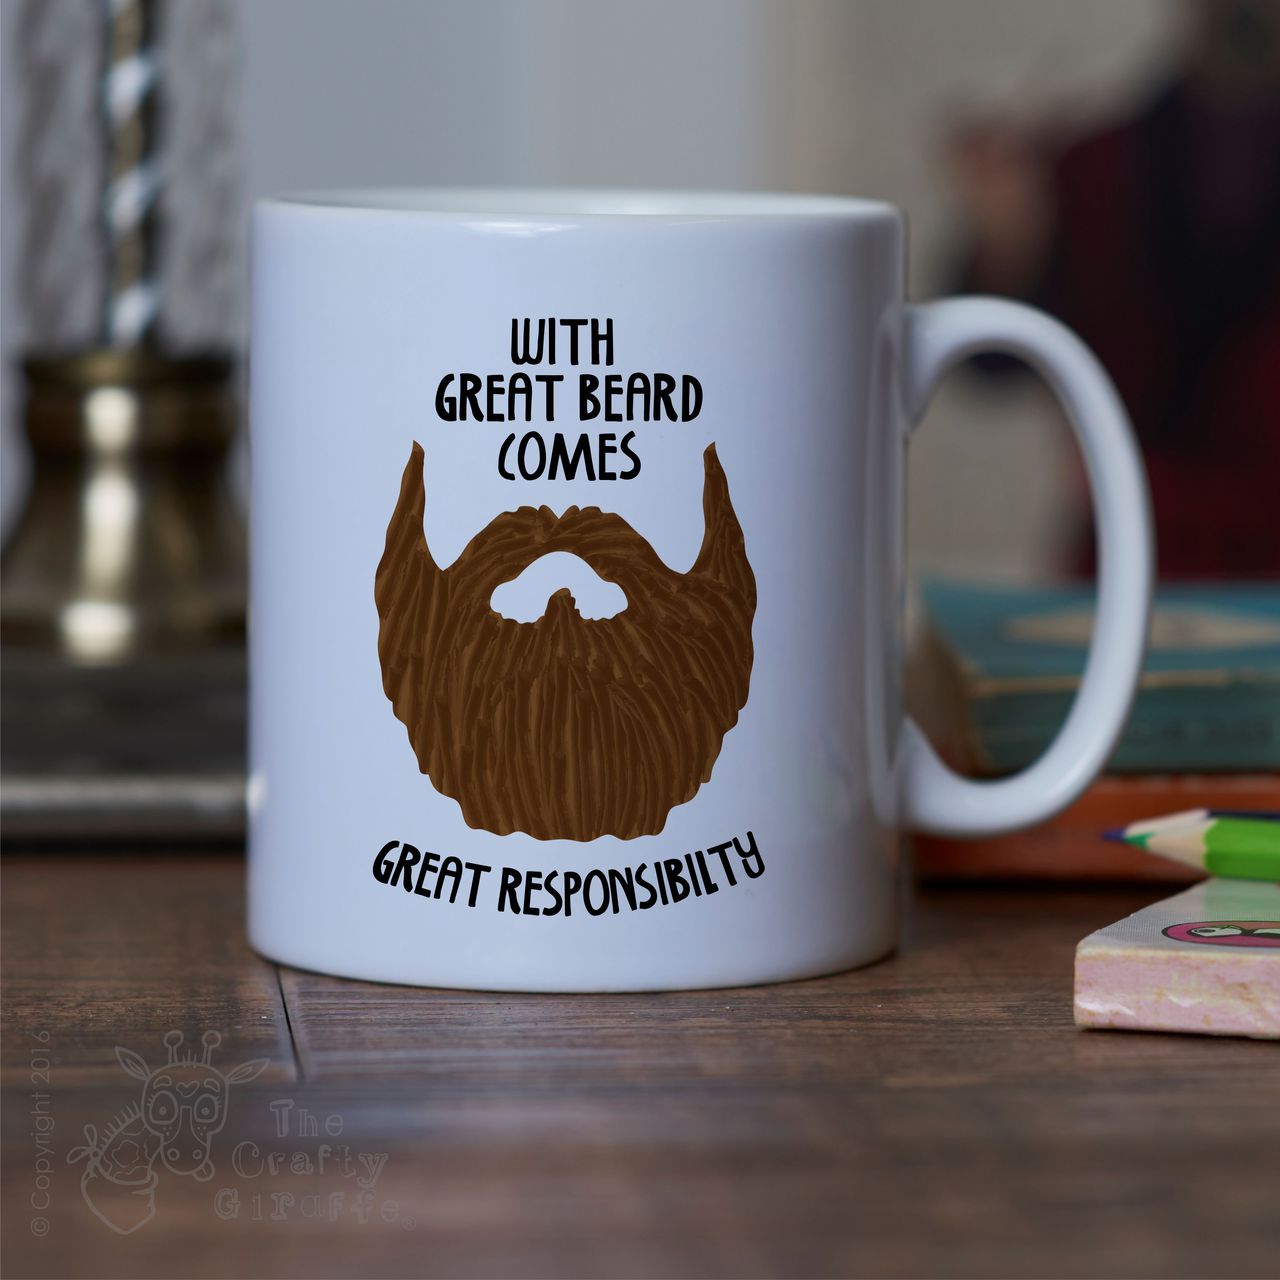 With great beard comes great responsibility Mug – Brown